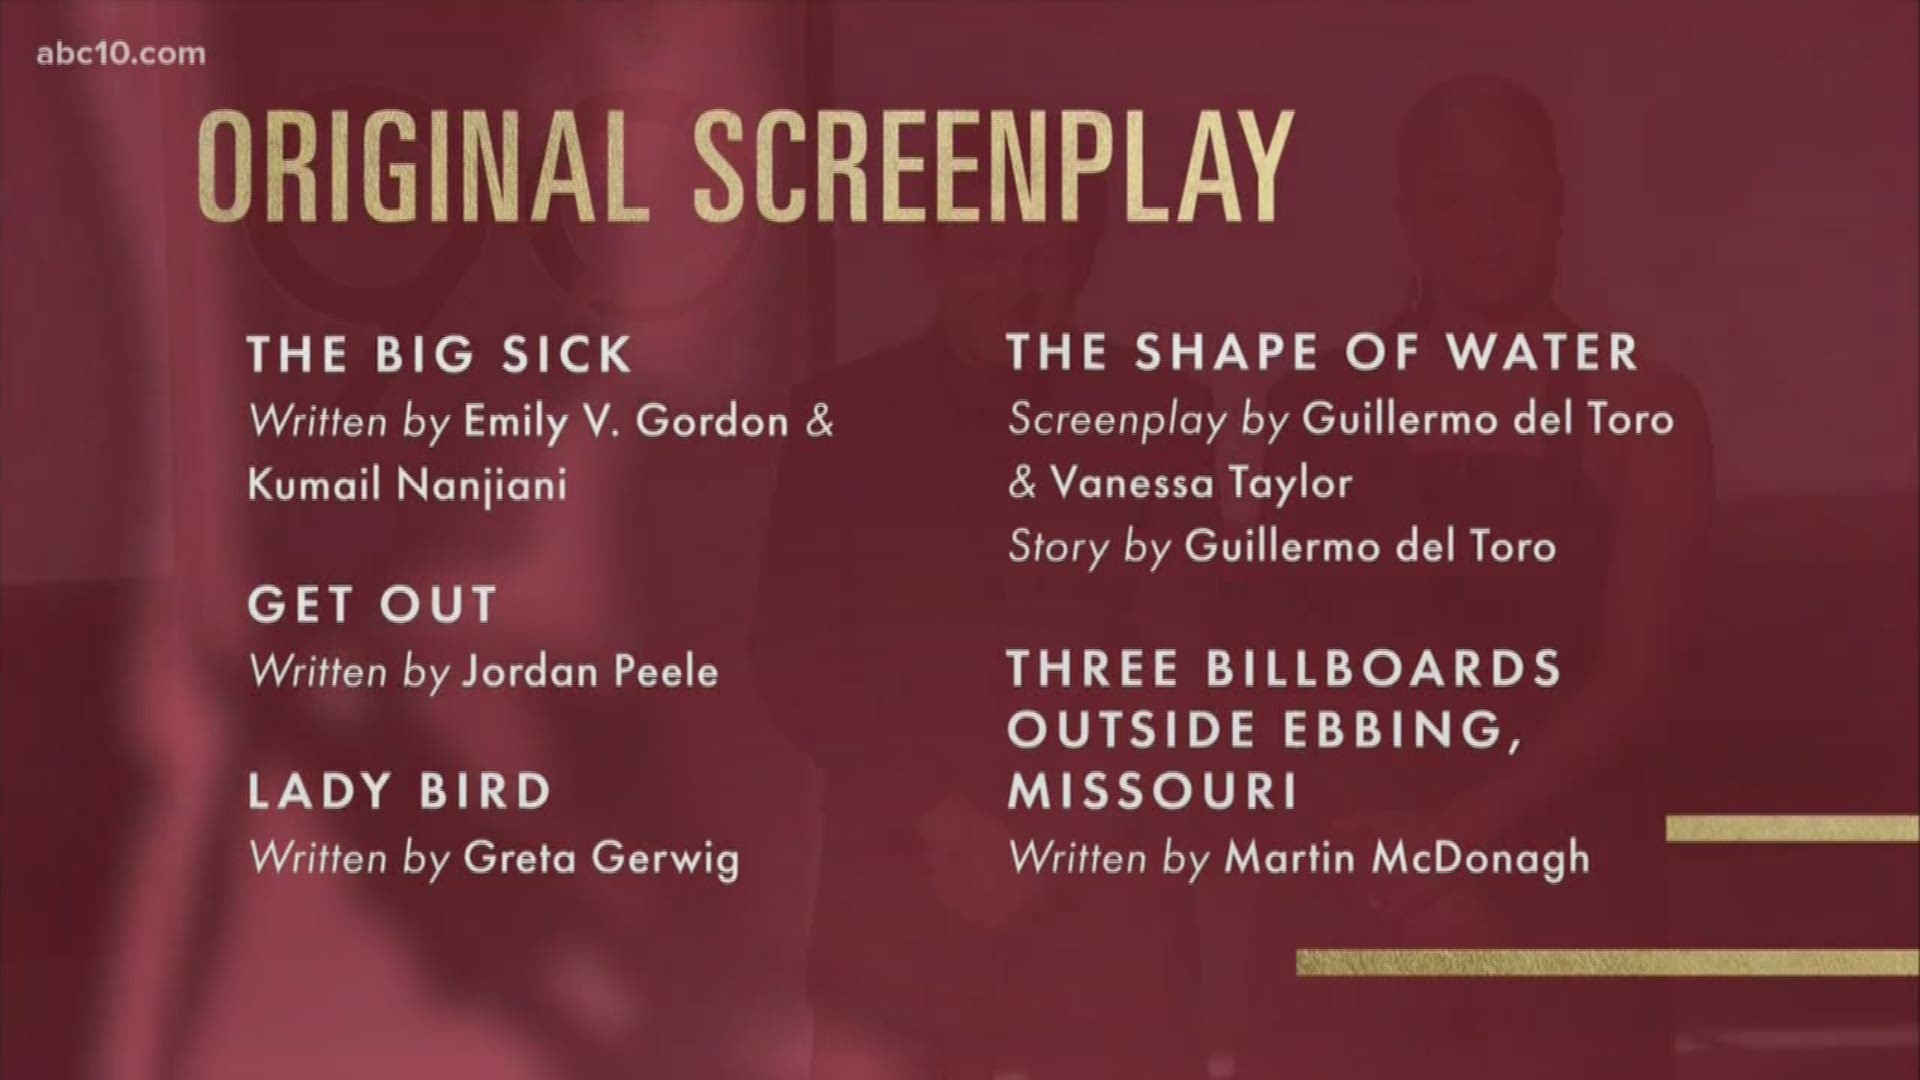 This is what we've all been waiting for - the 90th Oscars nominations. 